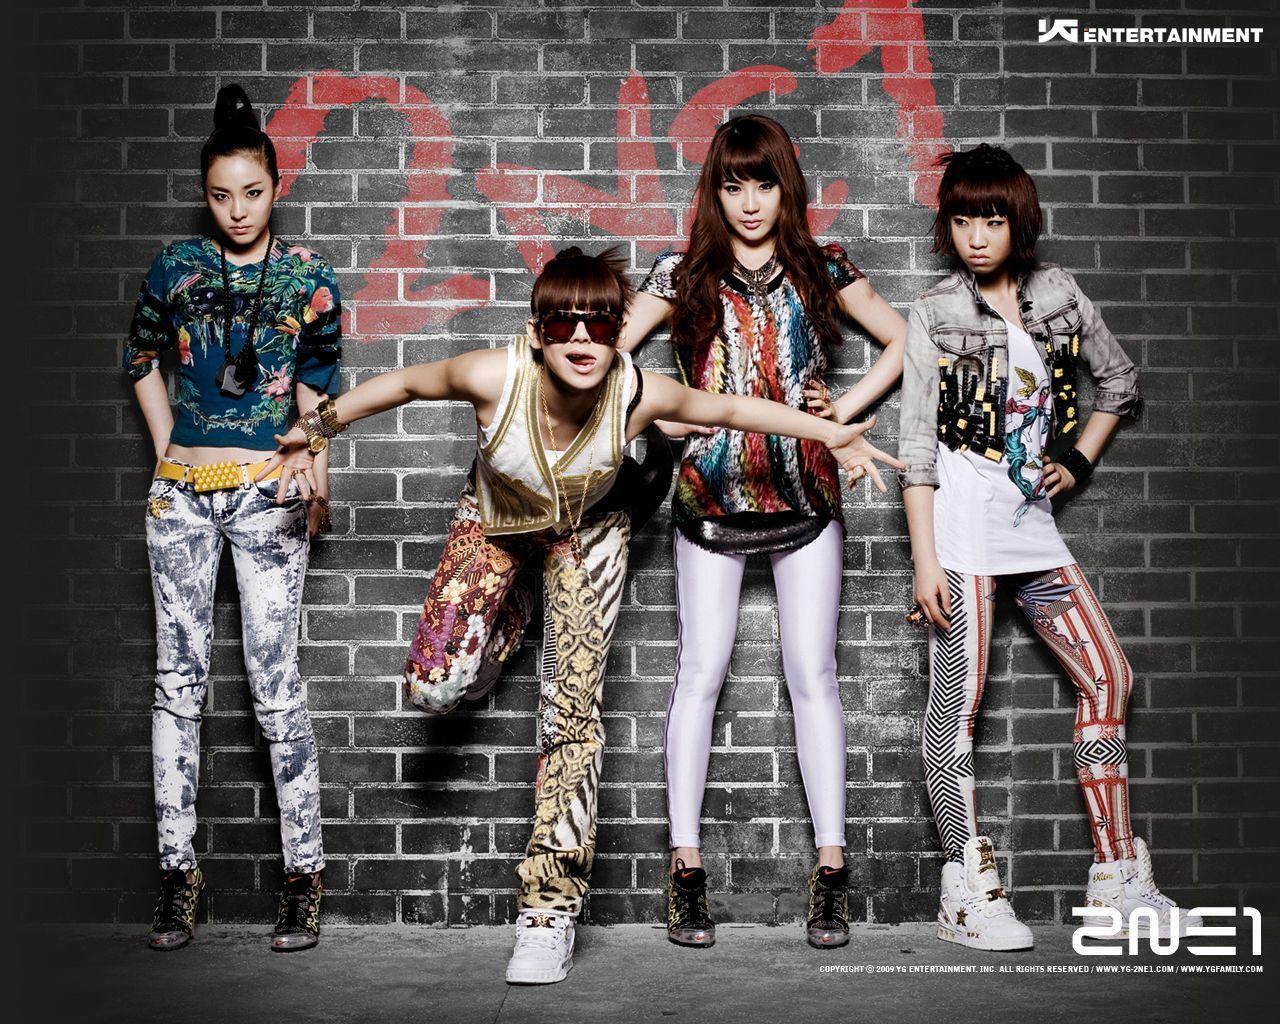 2NE1<3RS image 2NE1 Comeback HD wallpapers and backgrounds photos